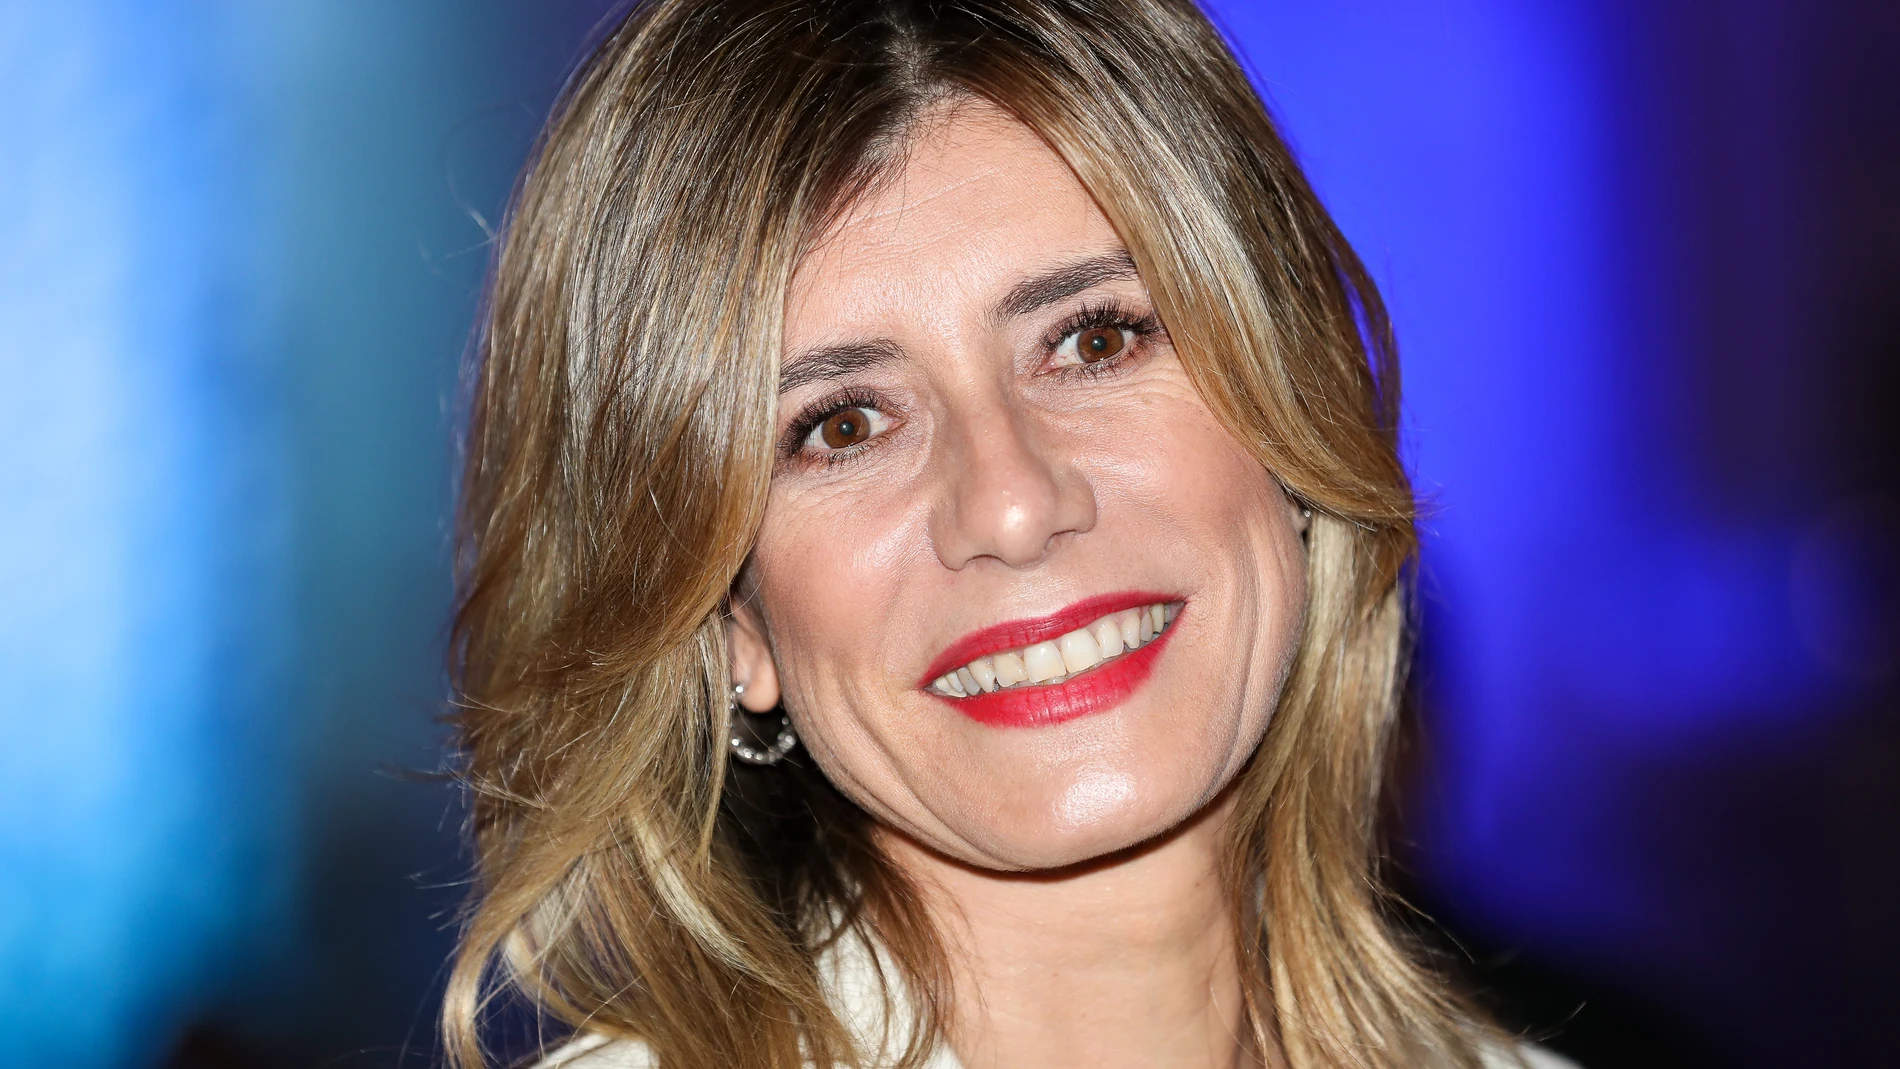 Begoña Gomez attending the 40 anniversary of International Tourism Fair (FITUR) in Madrid on Tuesday, 21 January 2020.